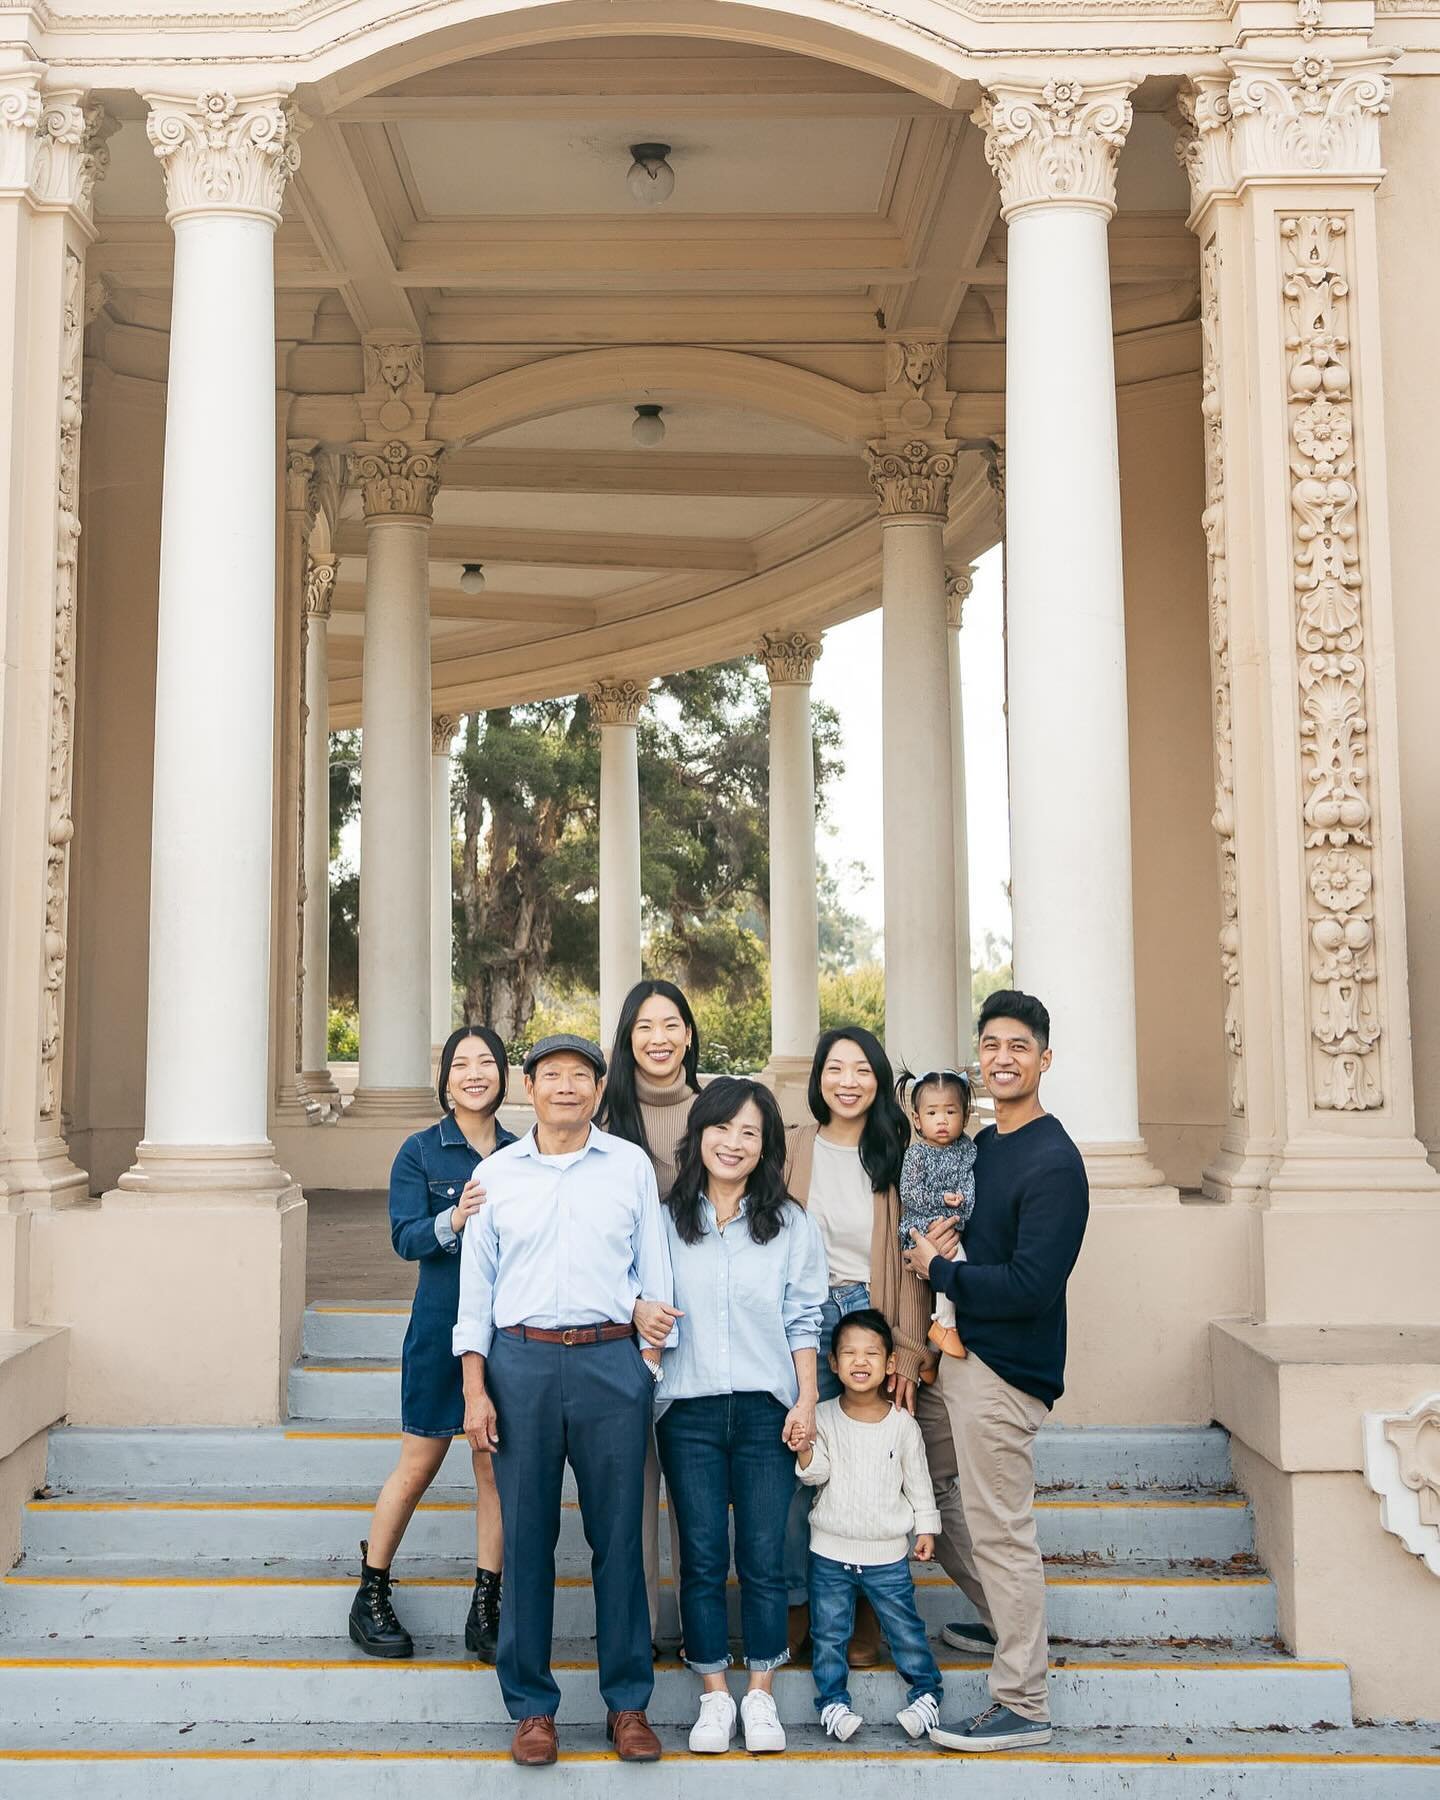 It&rsquo;s always been on my bucket list to take photos at balboa park. So when this sweet family requested this location I was like &ldquo;Yessss!! yes yes yes would love to take photos for you guys there!!&rdquo; 😆

#balboapark #balboaparkphotogra